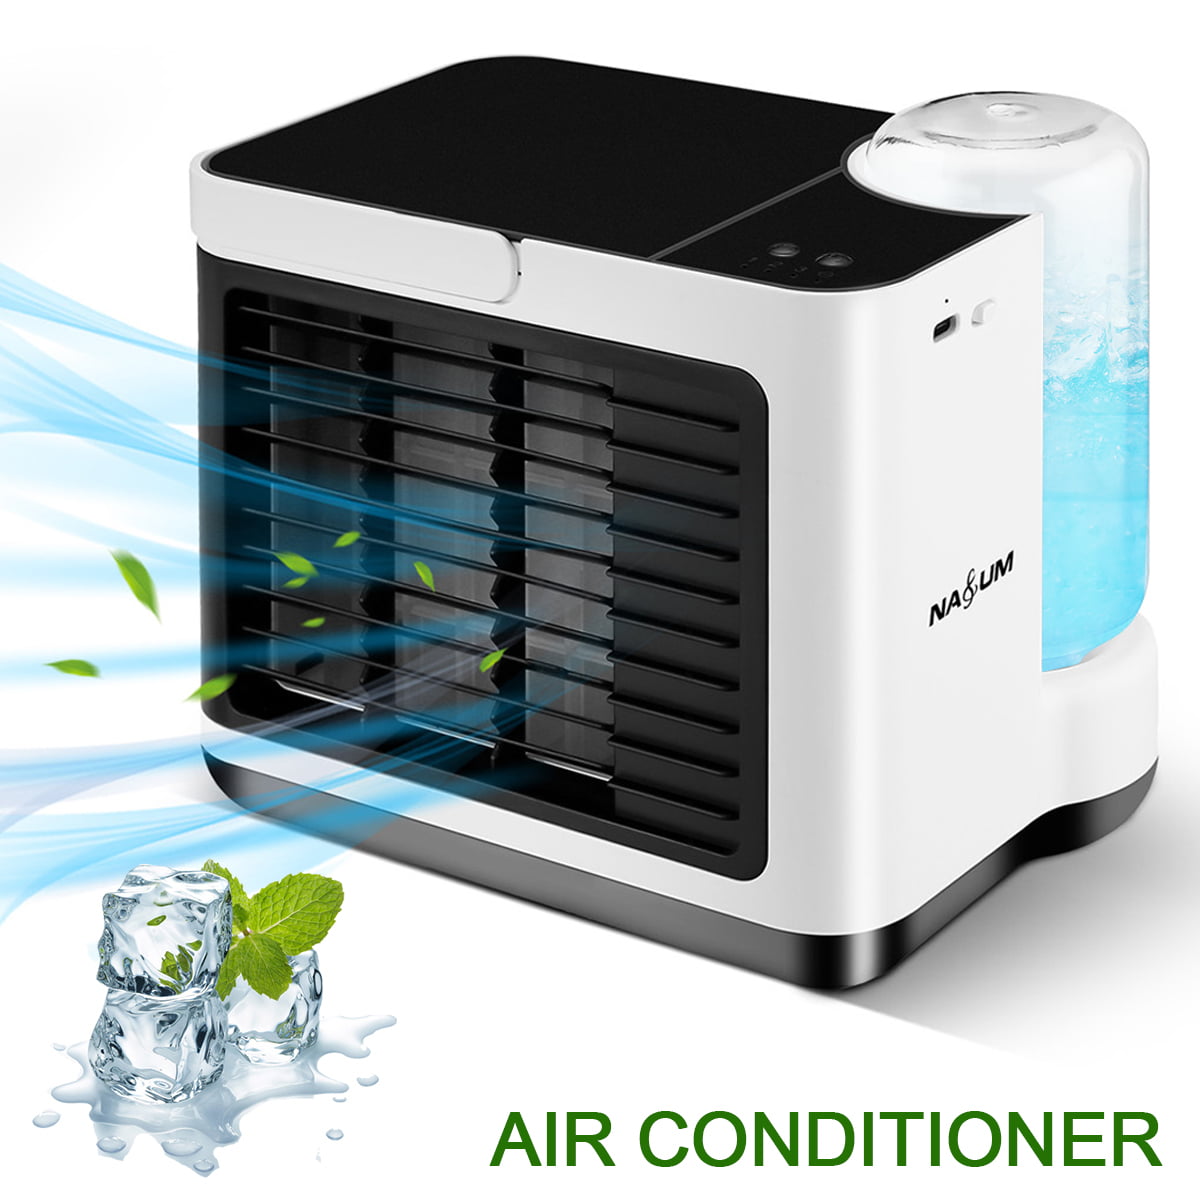 Portable Air Conditioner Personal Space Air Conditioner with USB Mini Cooler Humidifier Cooling for Car & Office Household Indoors Portable AC Cooling Fan with 3 Different Speeds Air Purifier 